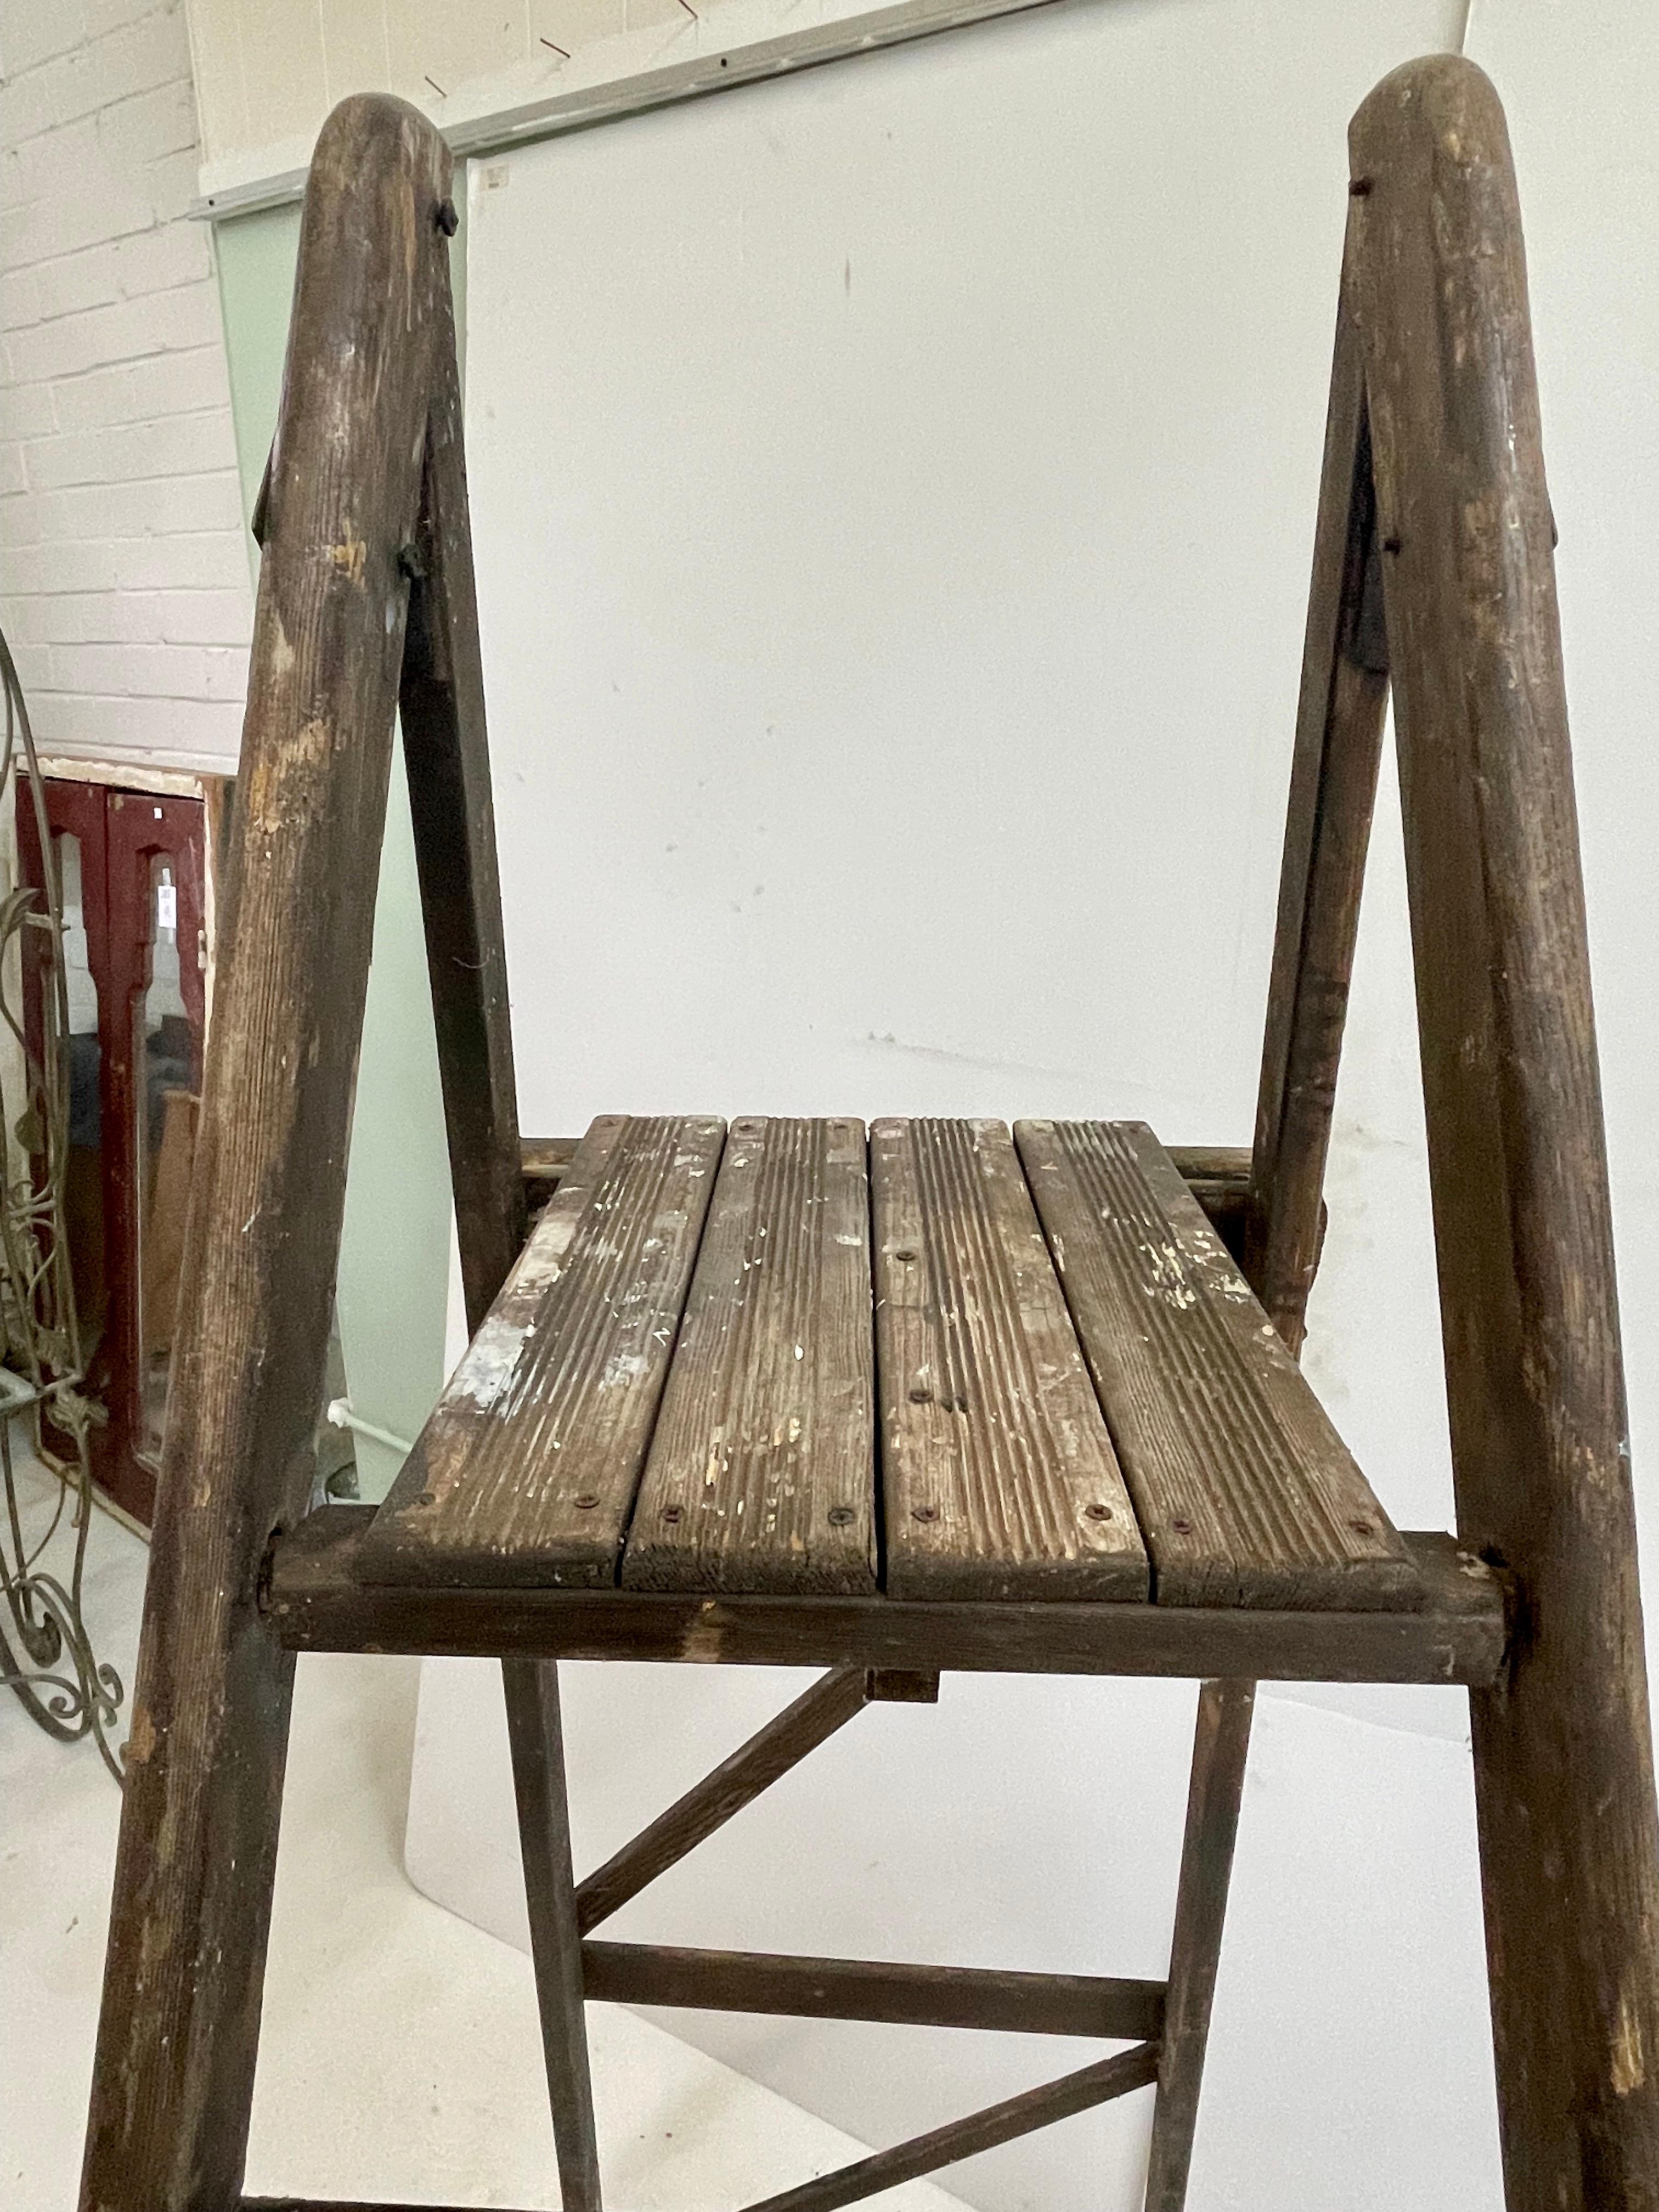 English Antique Wooden Folding Ladder with Tray Shelf In Fair Condition For Sale In Atlanta, GA